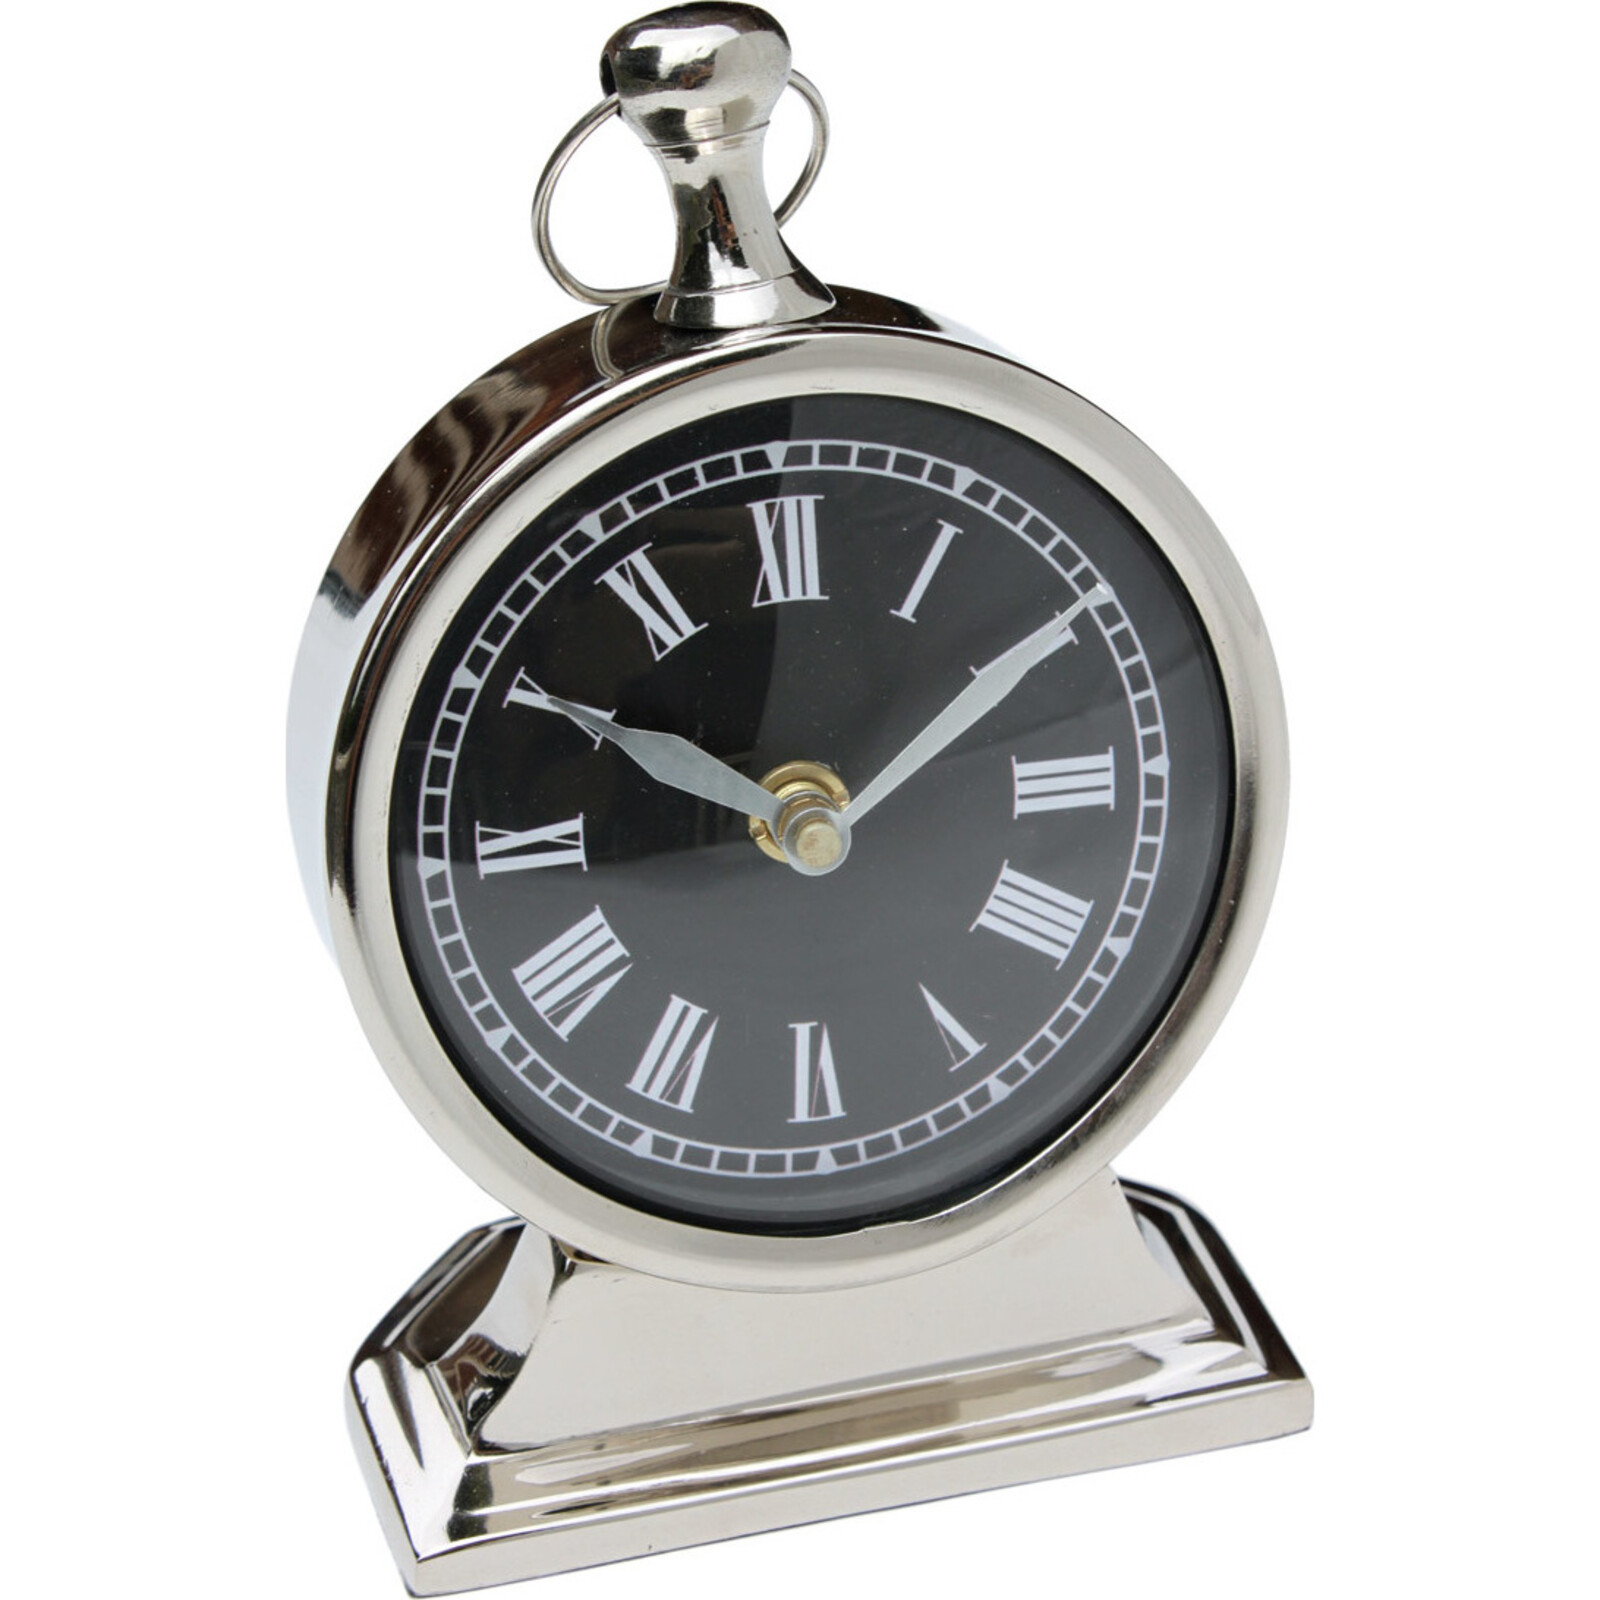 Standing Clock - Black Face - Small